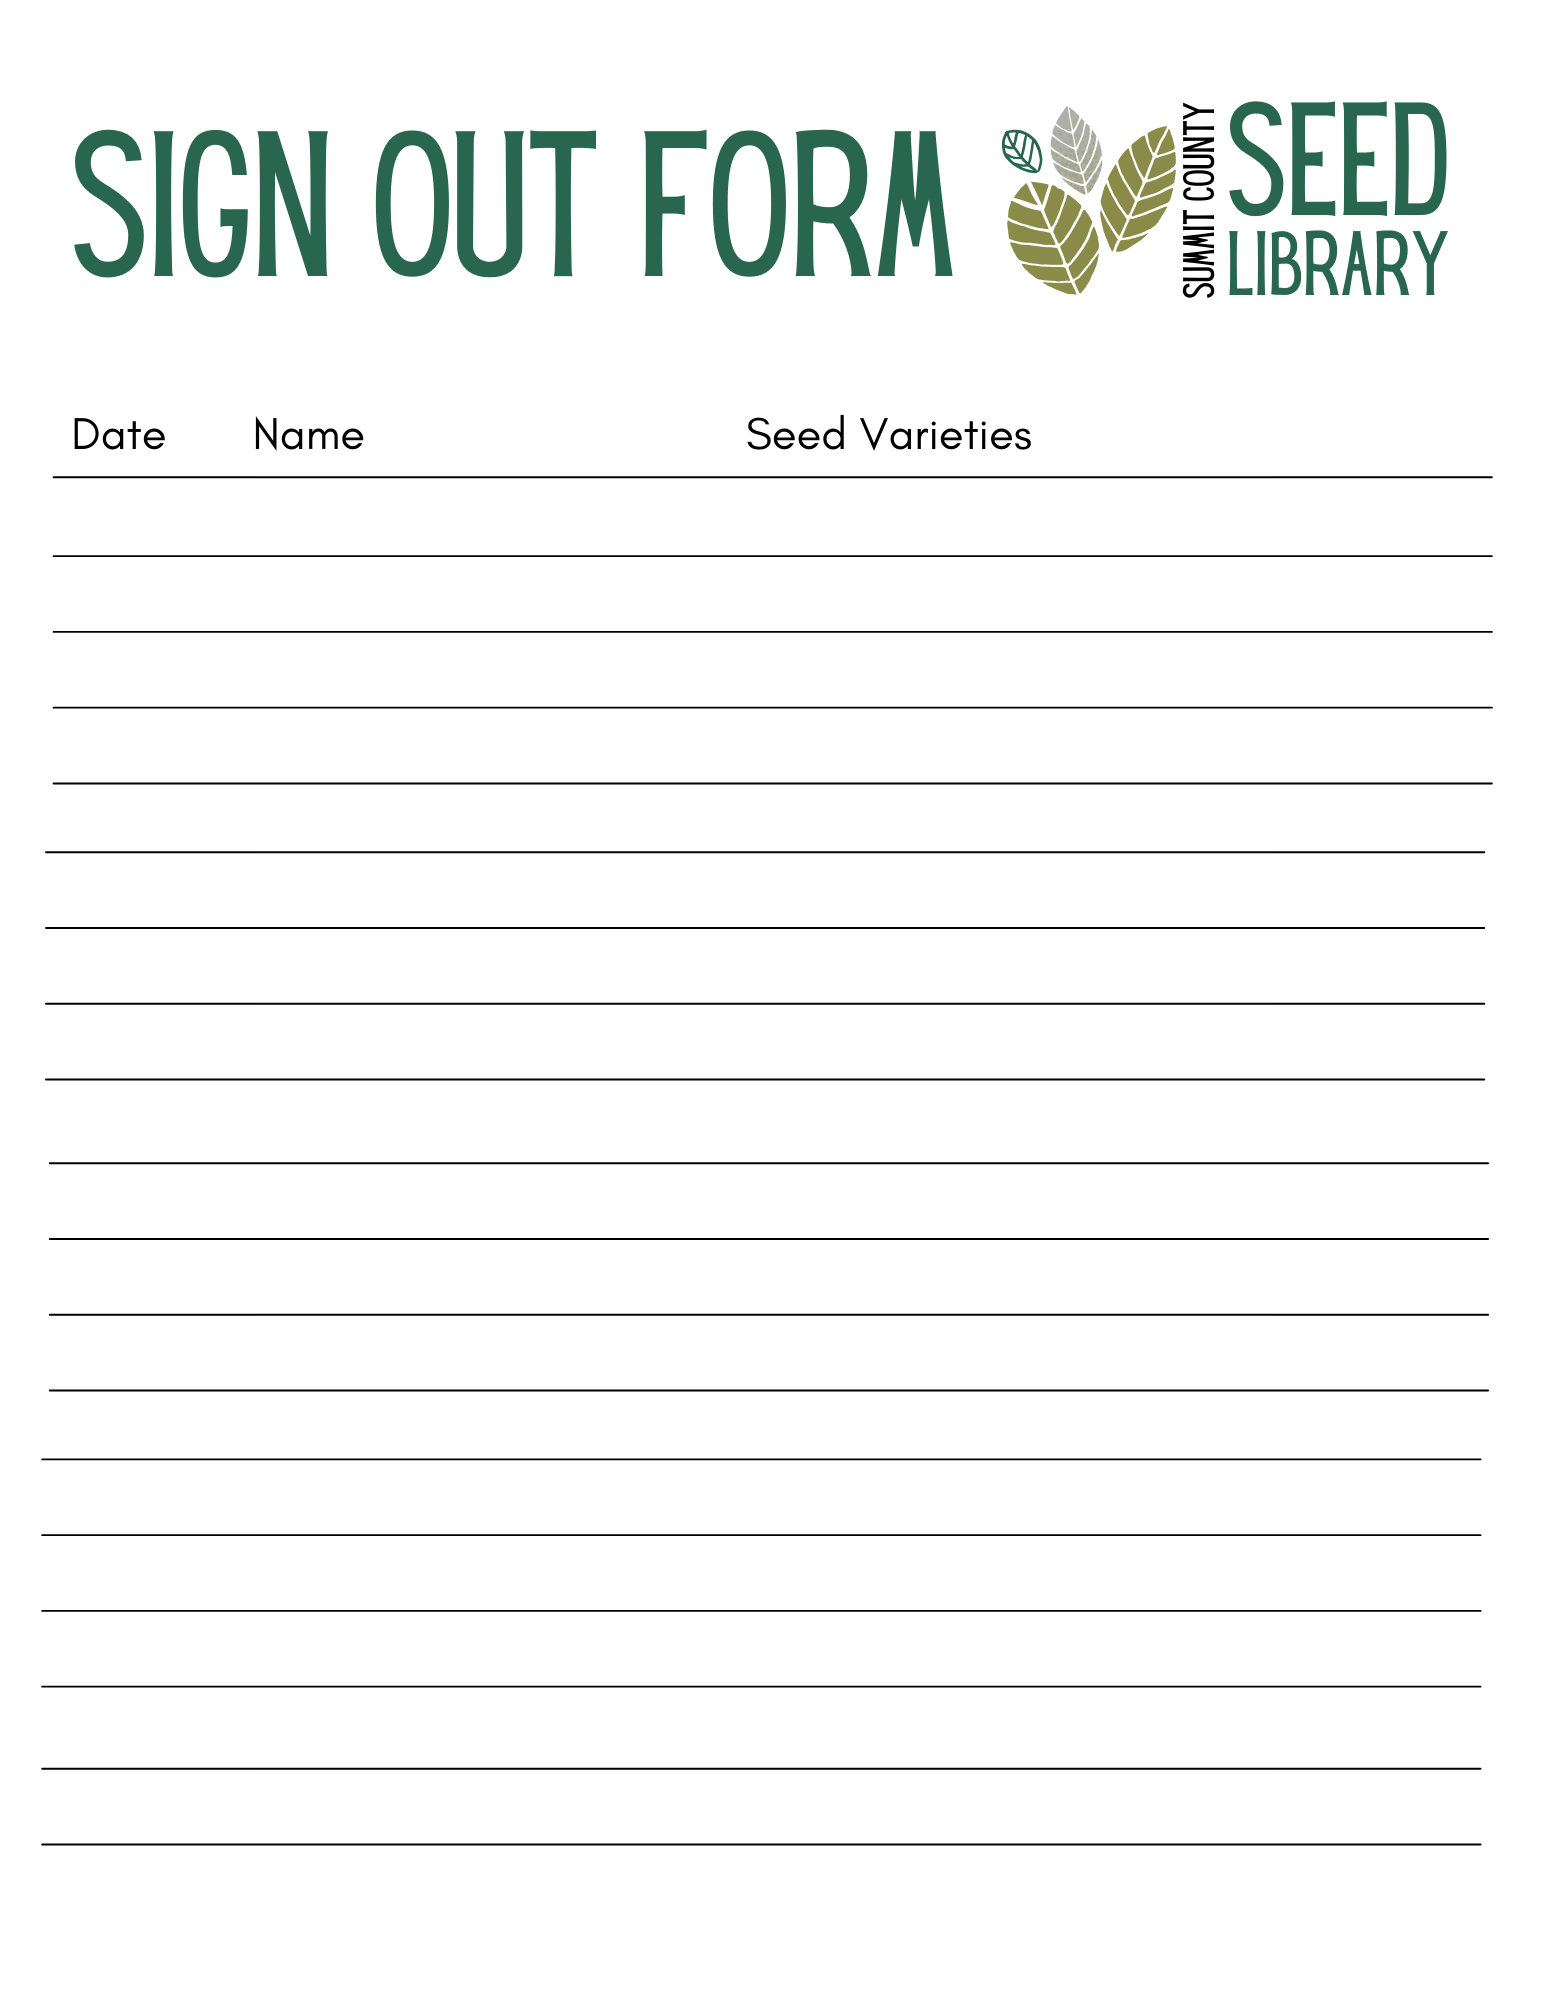 seed library sign out form.png